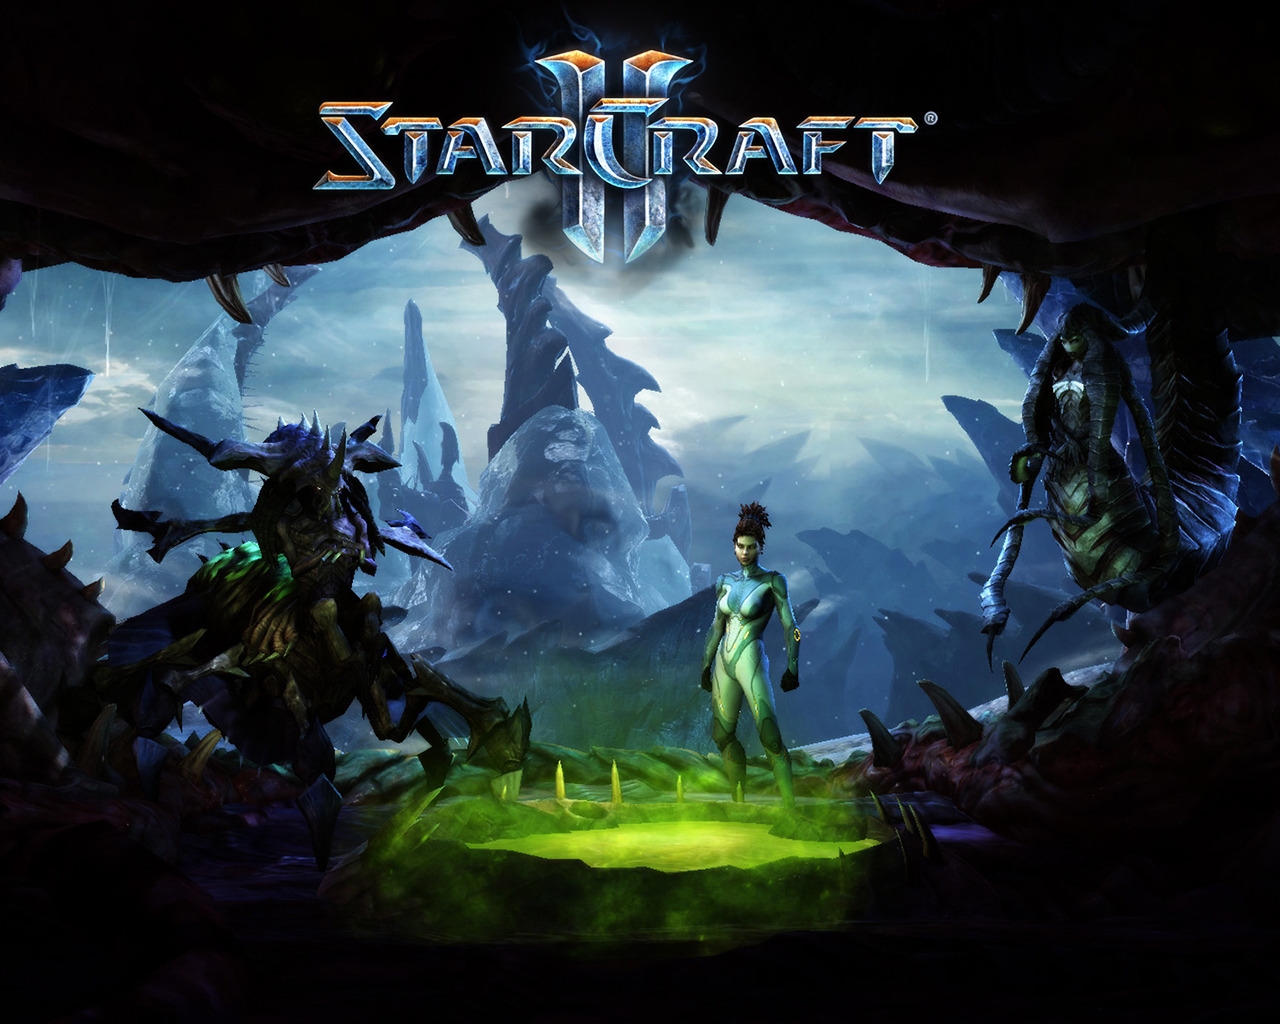 Starcraft II Heart of the Swarm for 1280 x 1024 resolution